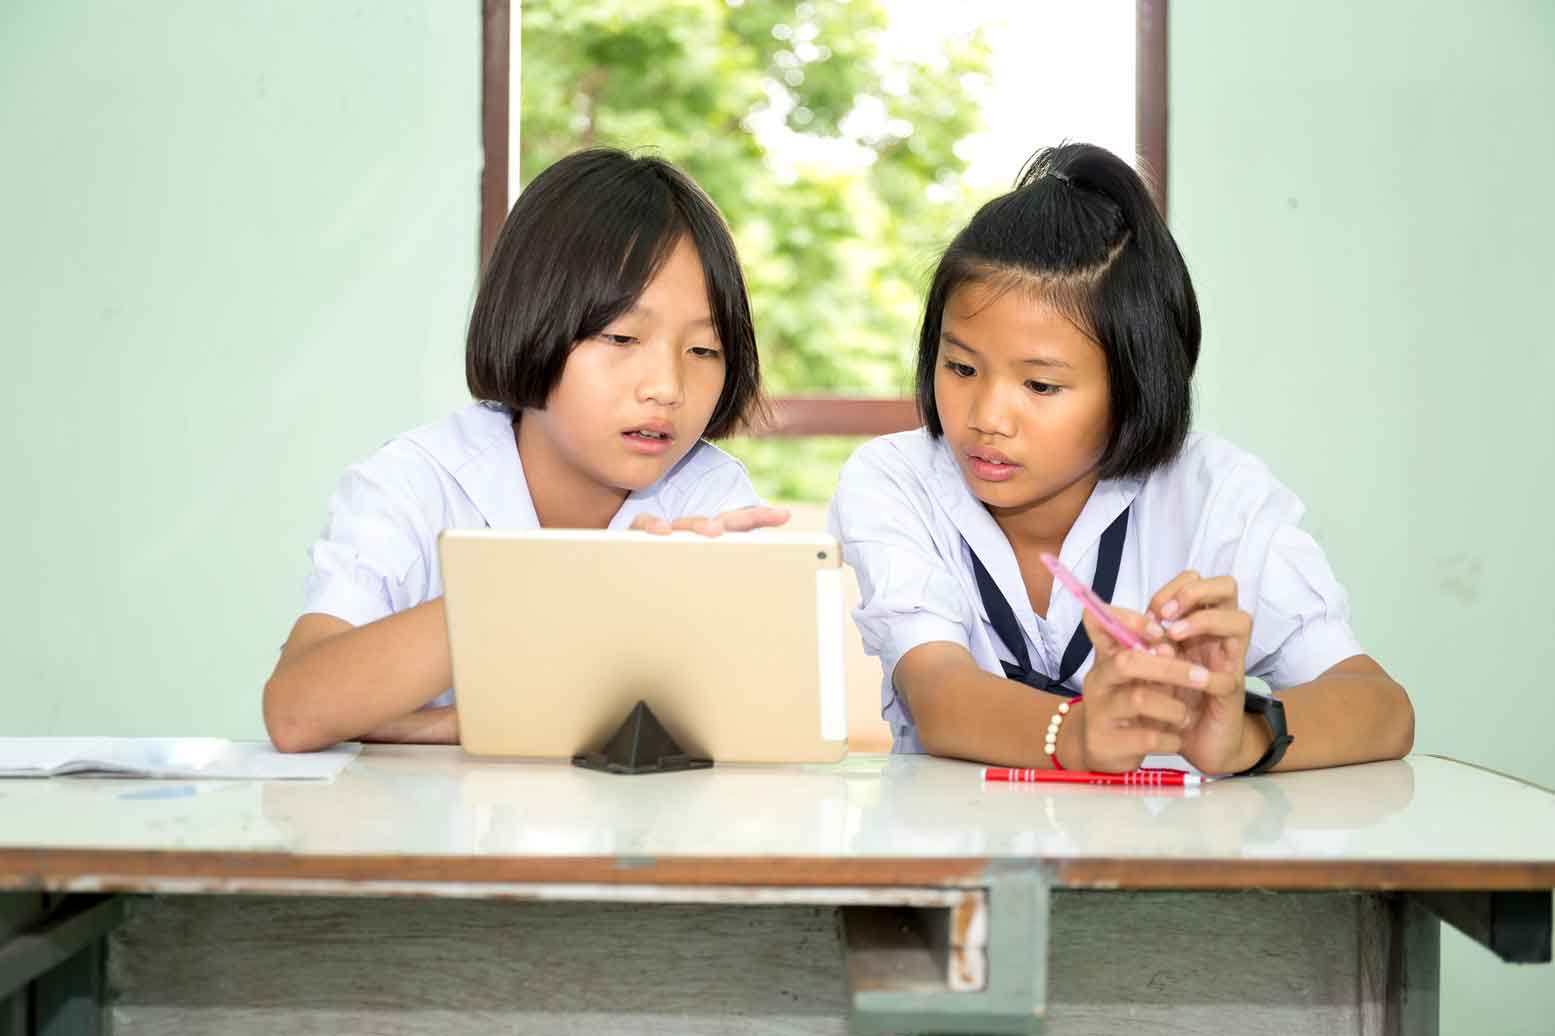 How can Southeast Asia’s children reach their full potential and become lifelong learners?